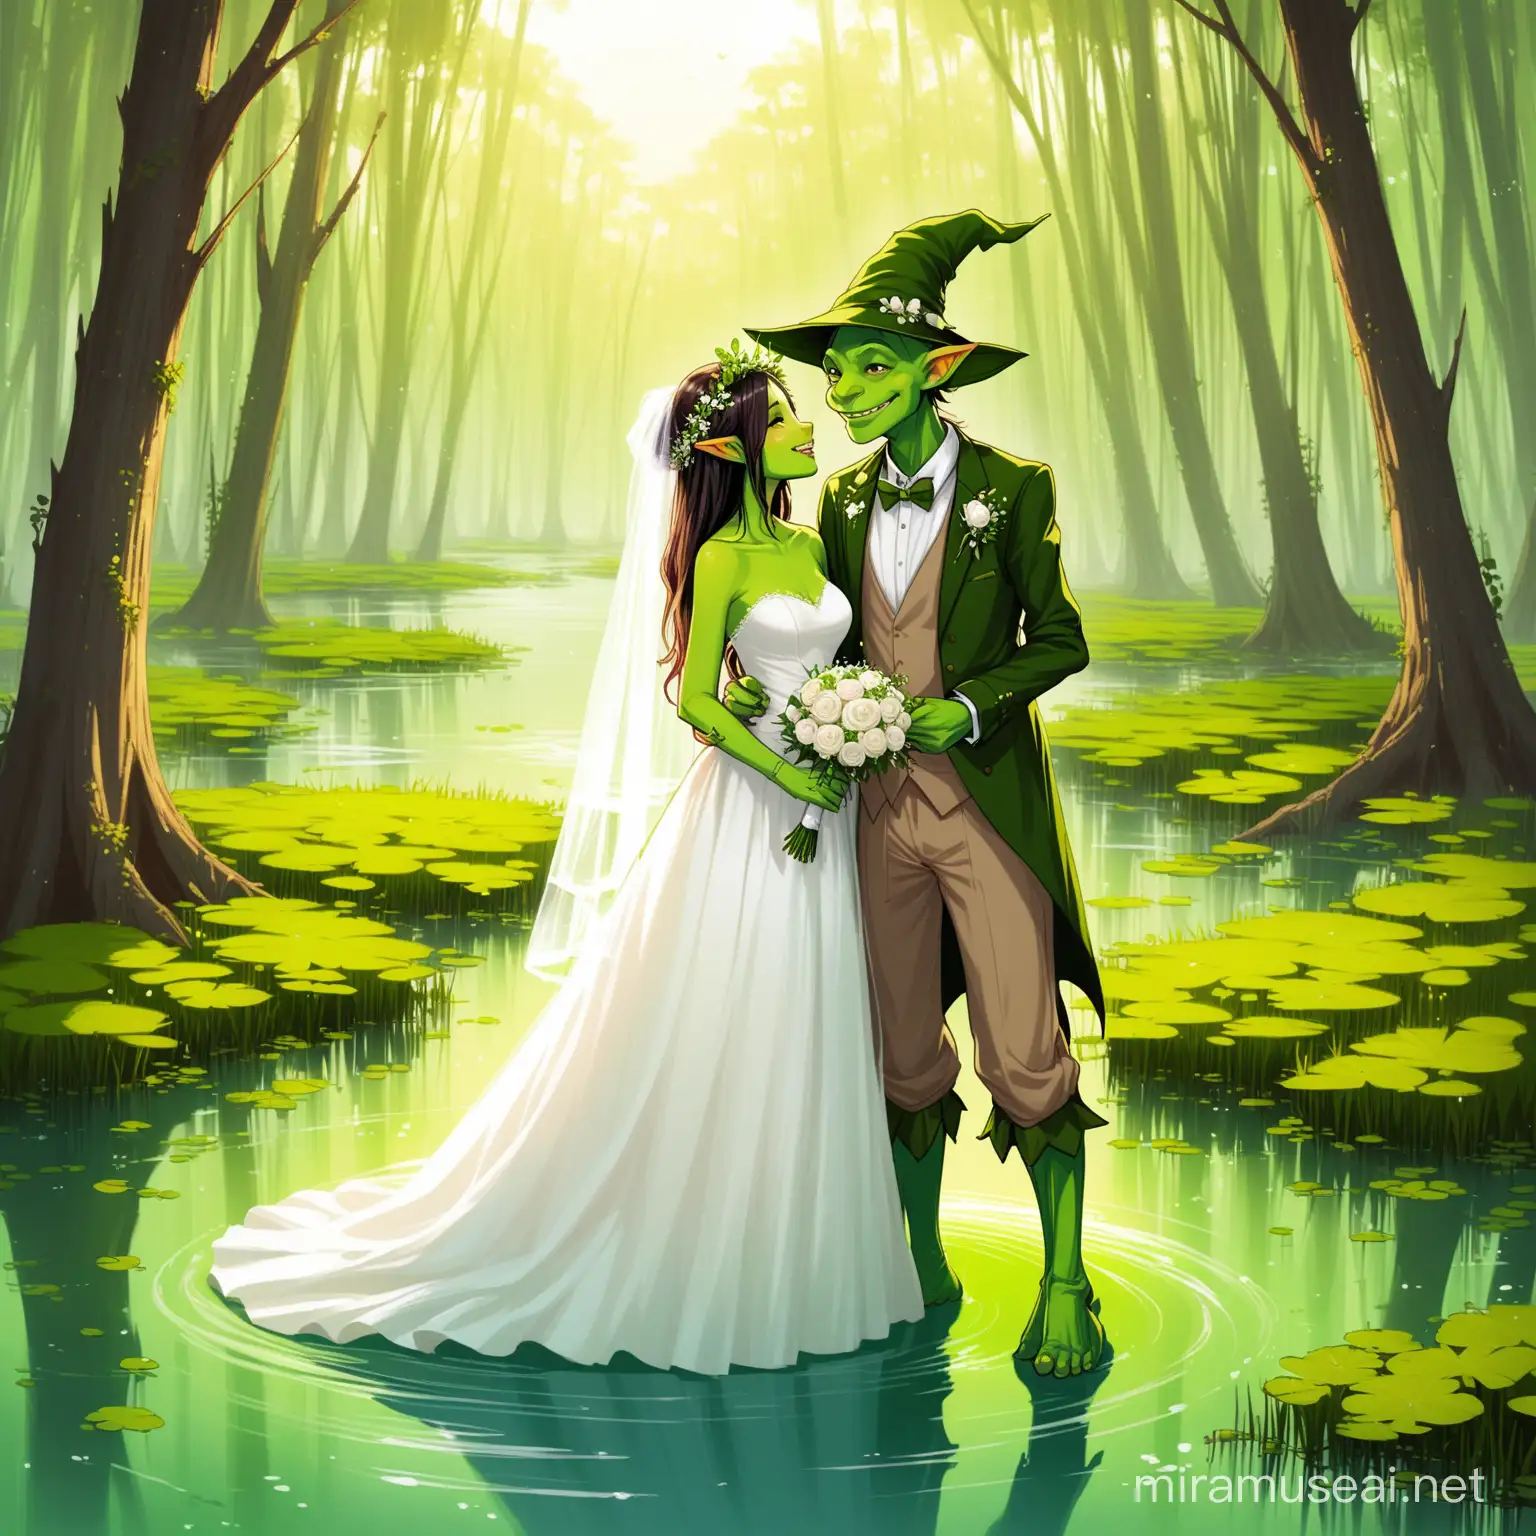 A pretty goblin lady couple getting married with a swamp background 